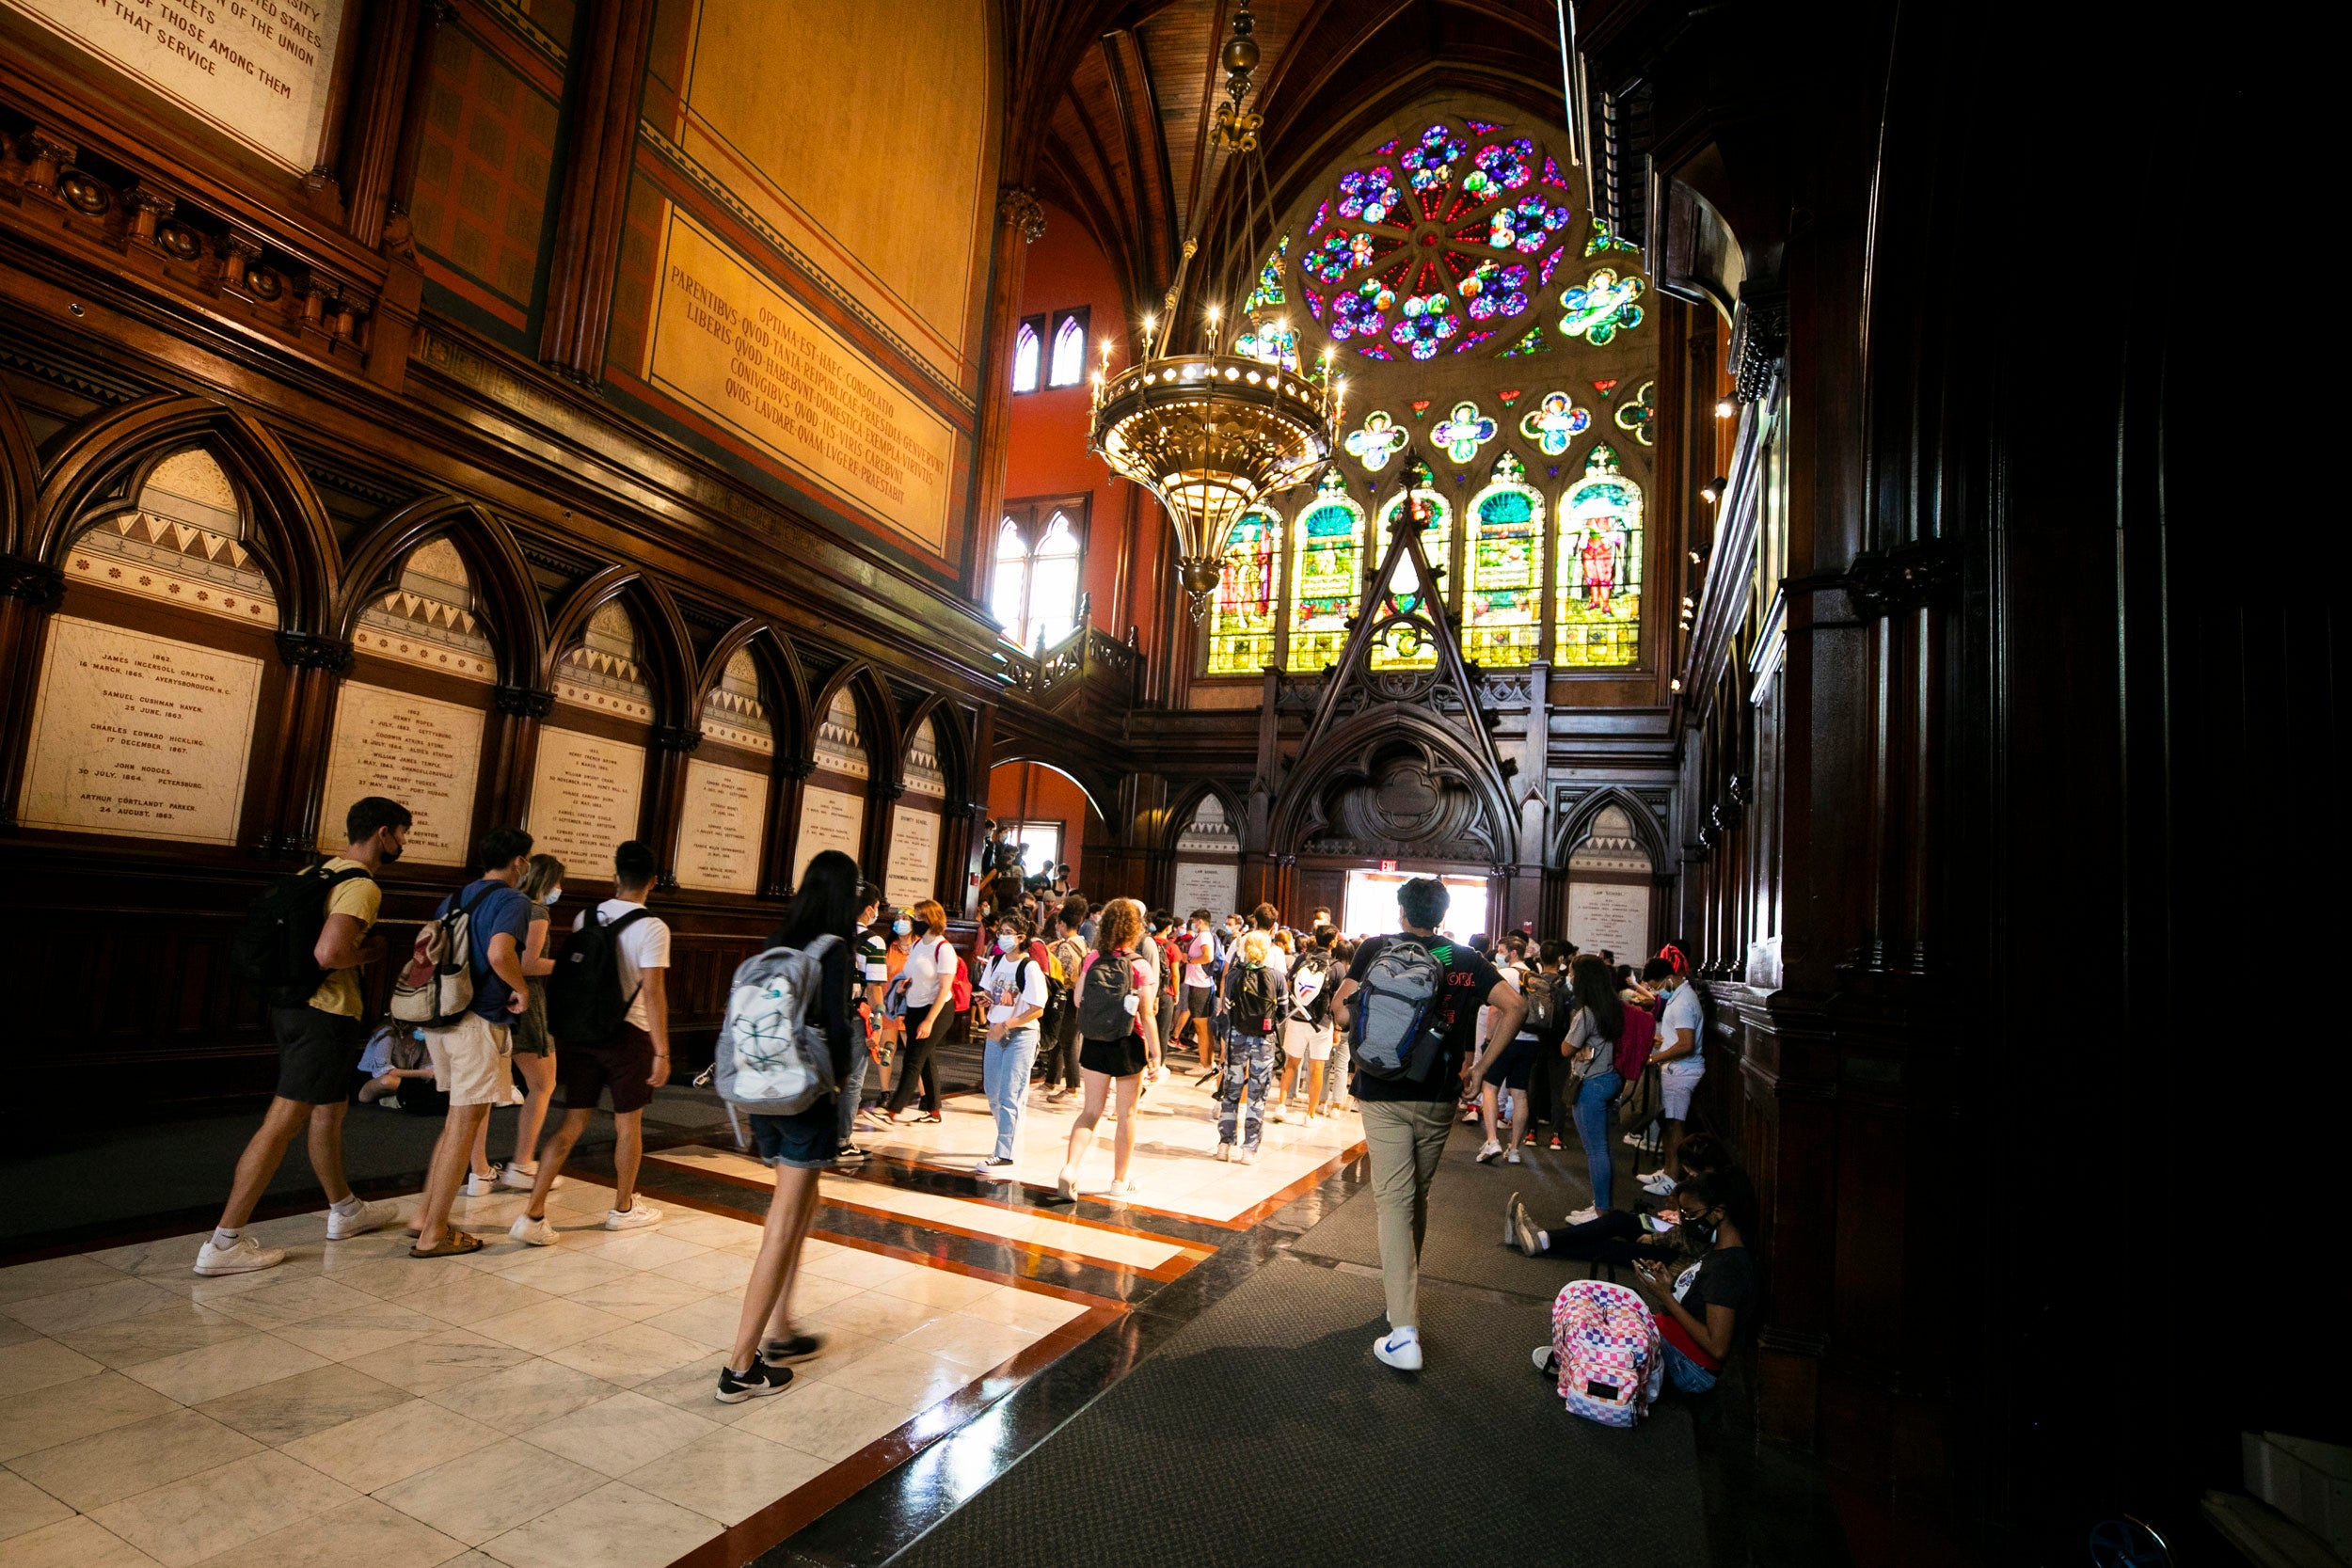 Students gather in the transept before heading into the lecture.